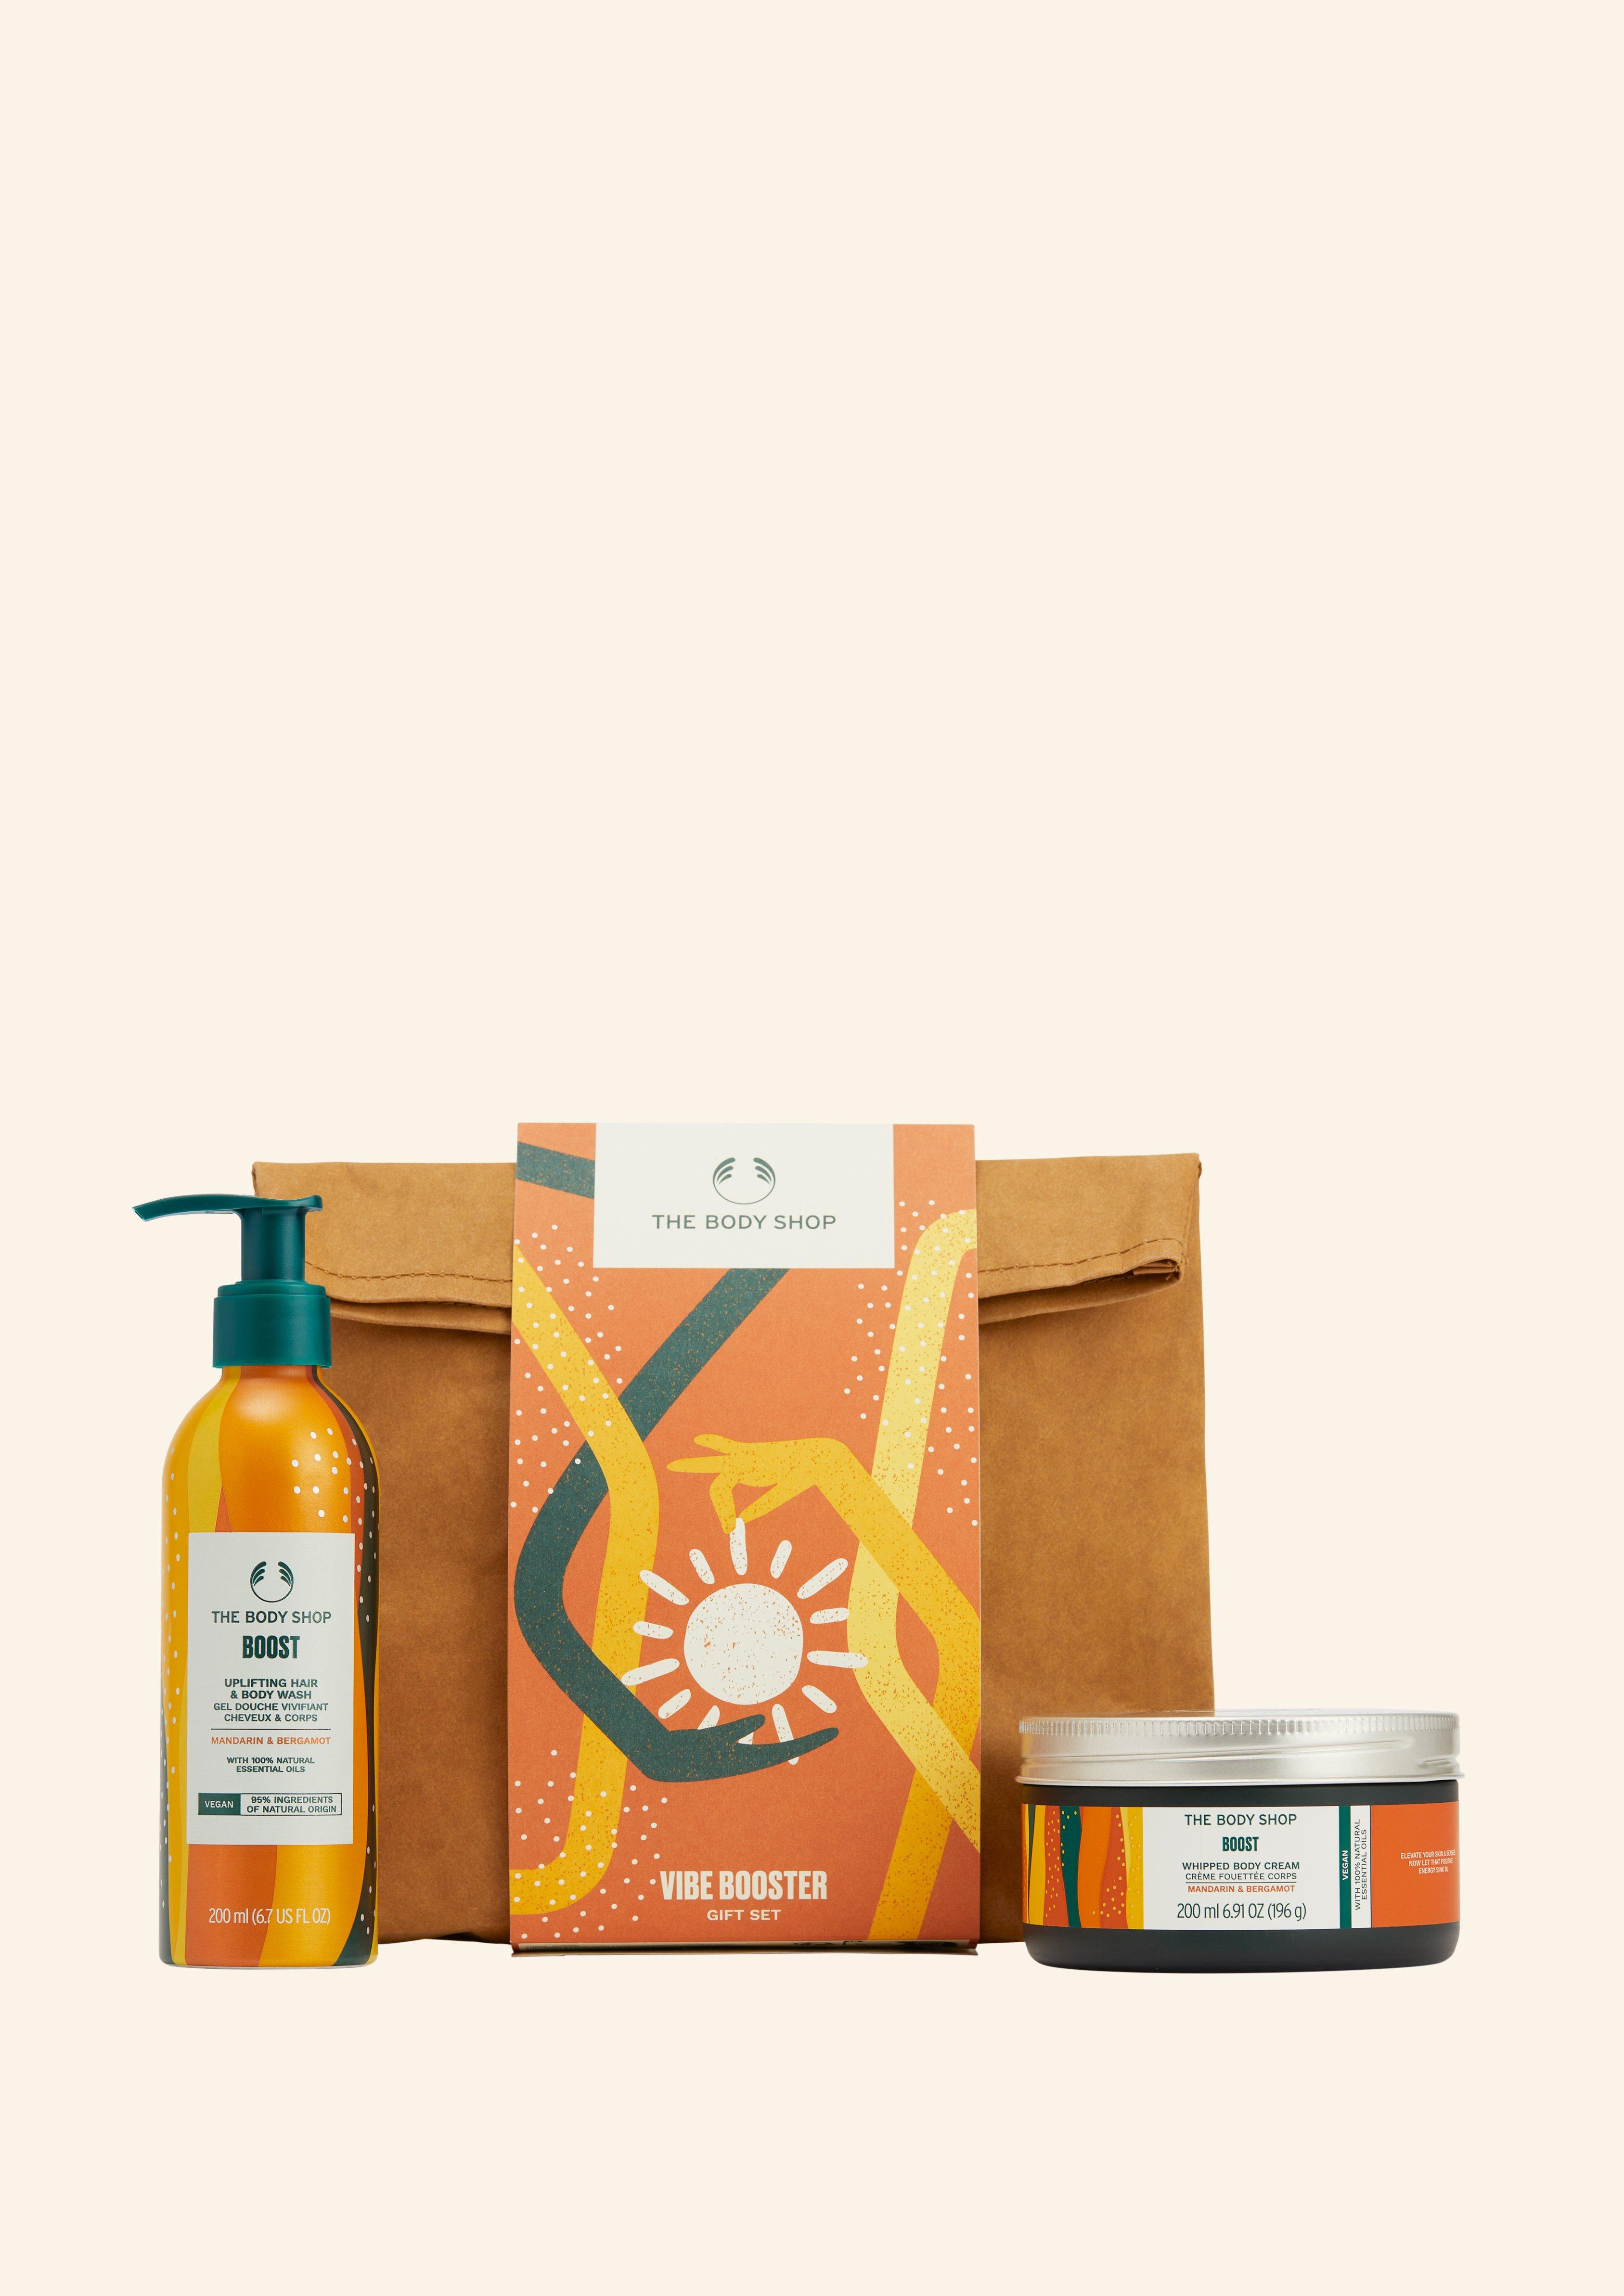 Vibe Booster Gift Set | Bath and Body gifts